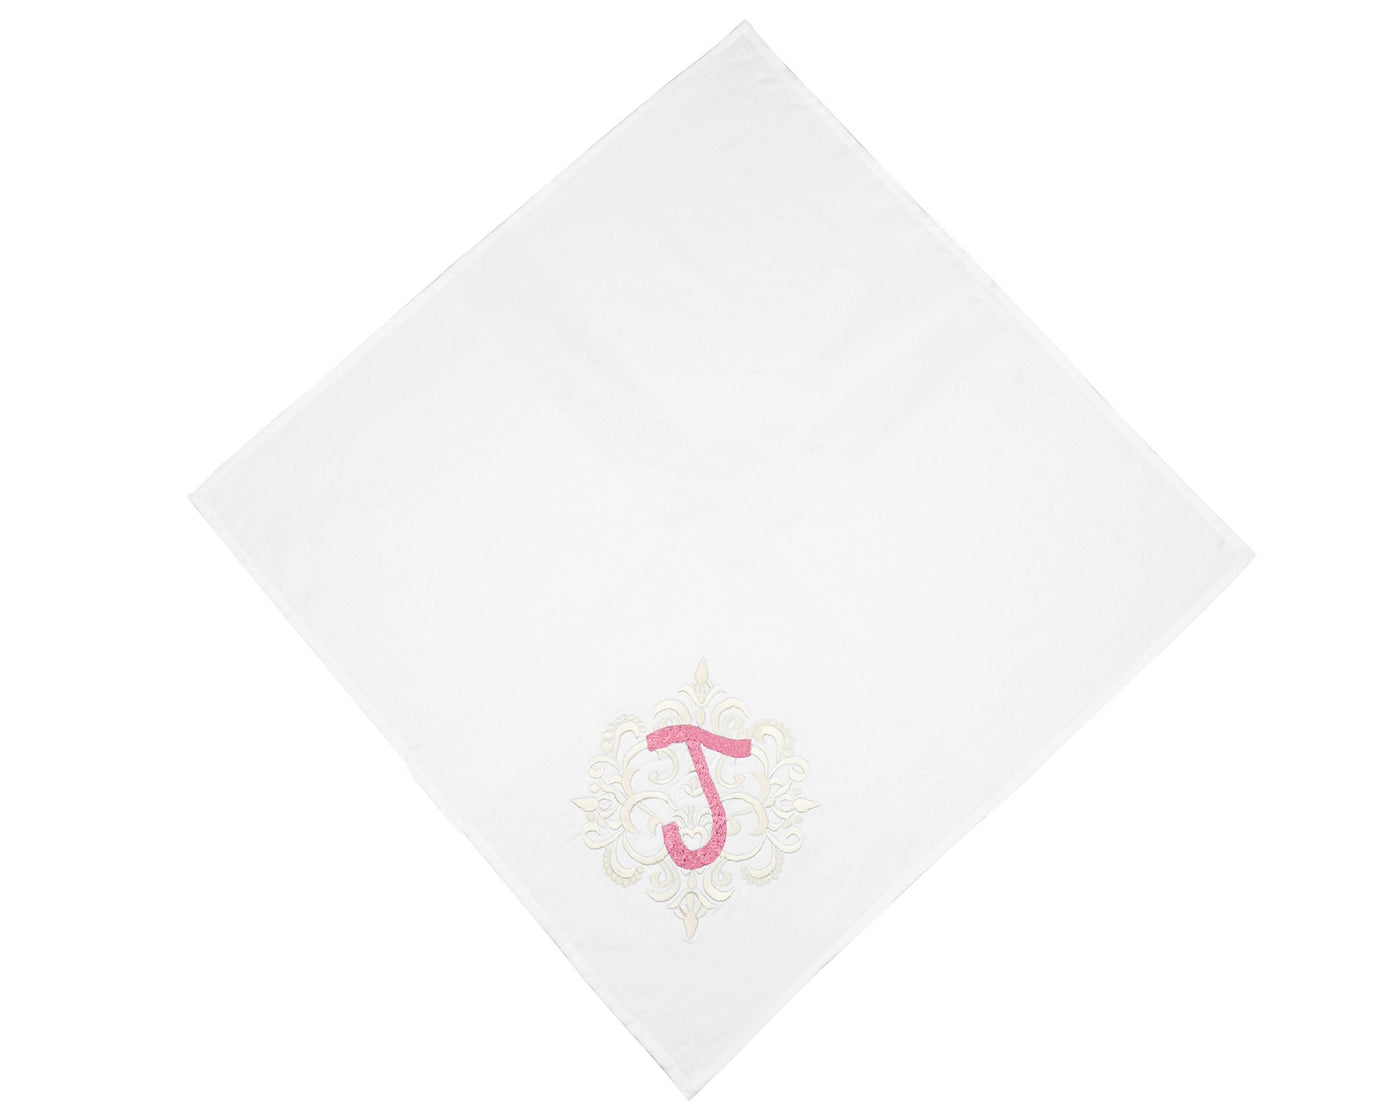 Personalized Embroidery Napkins